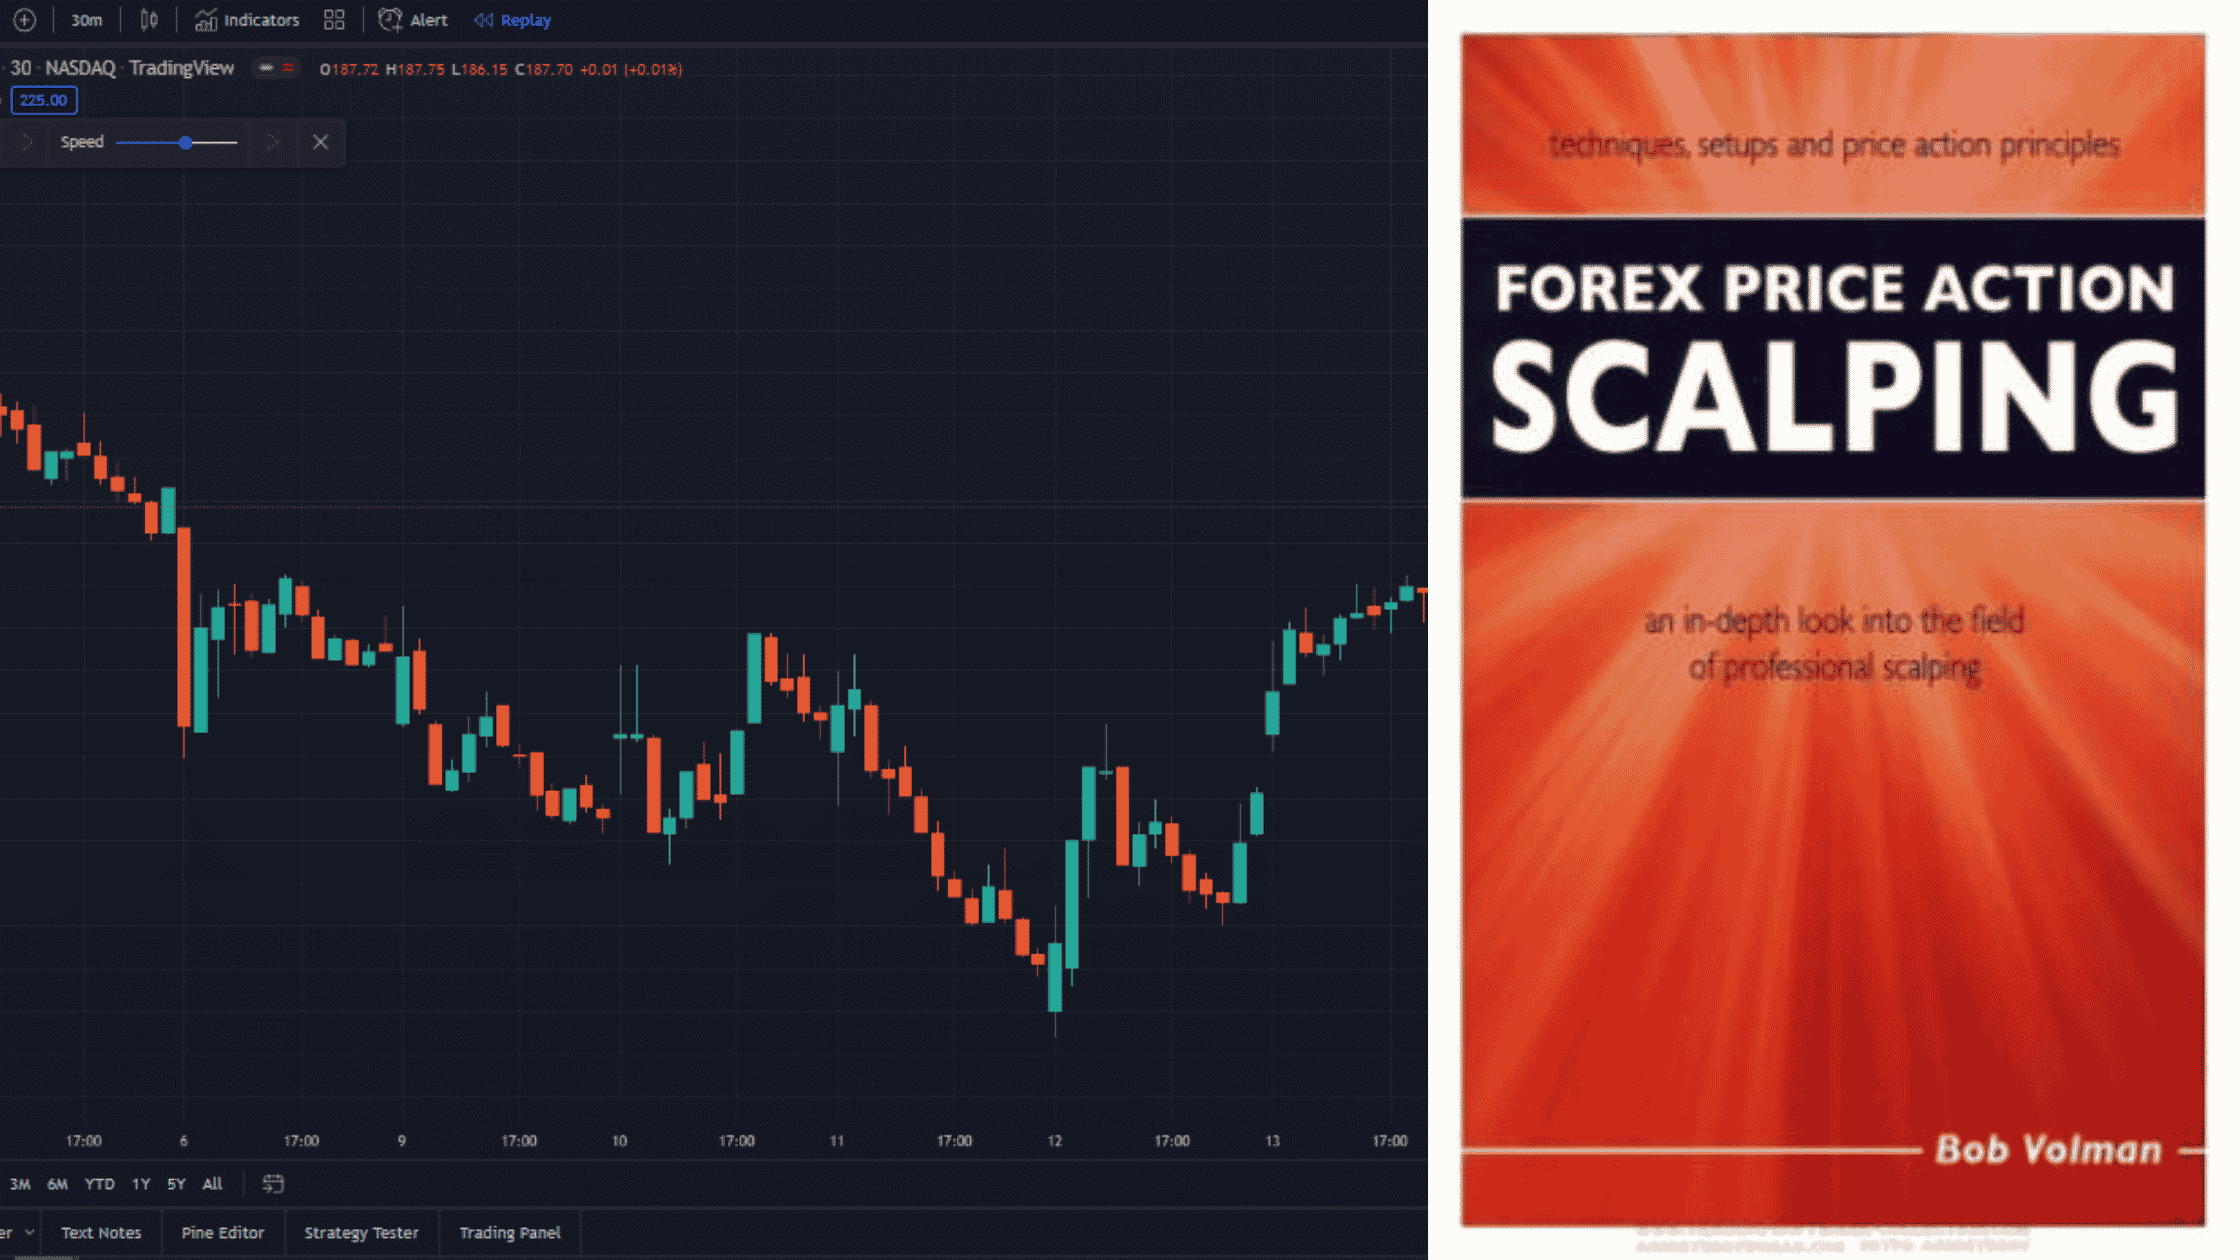 Bob volman forex price action scalping pdf editor forex patterns and probabilities trading strategies for trending and range bound markets hardcover